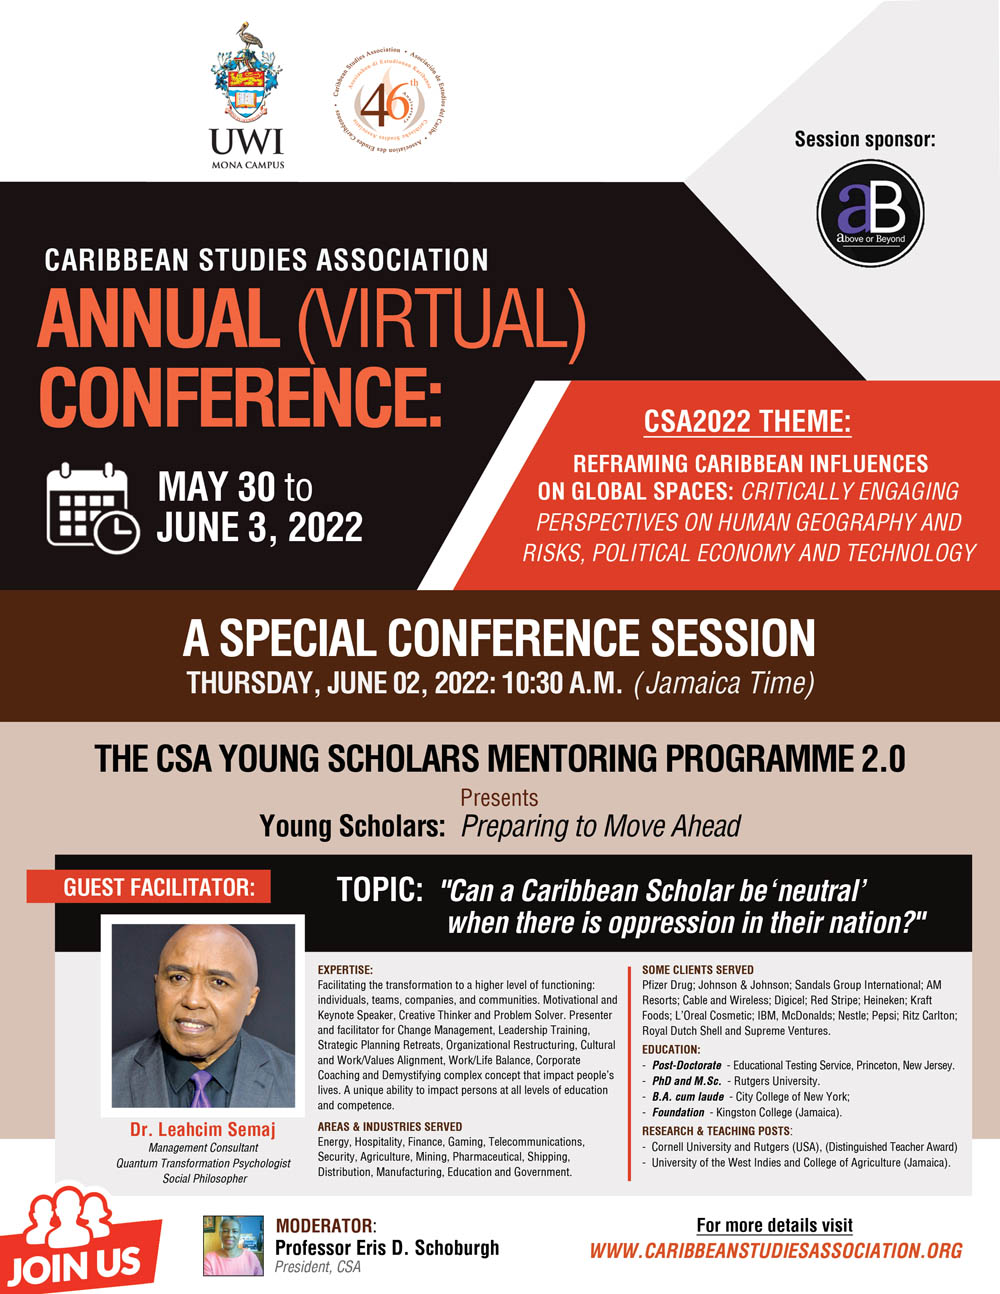 CSA Young Scholars Mentoring Programme 2.0 – Special Conference Session